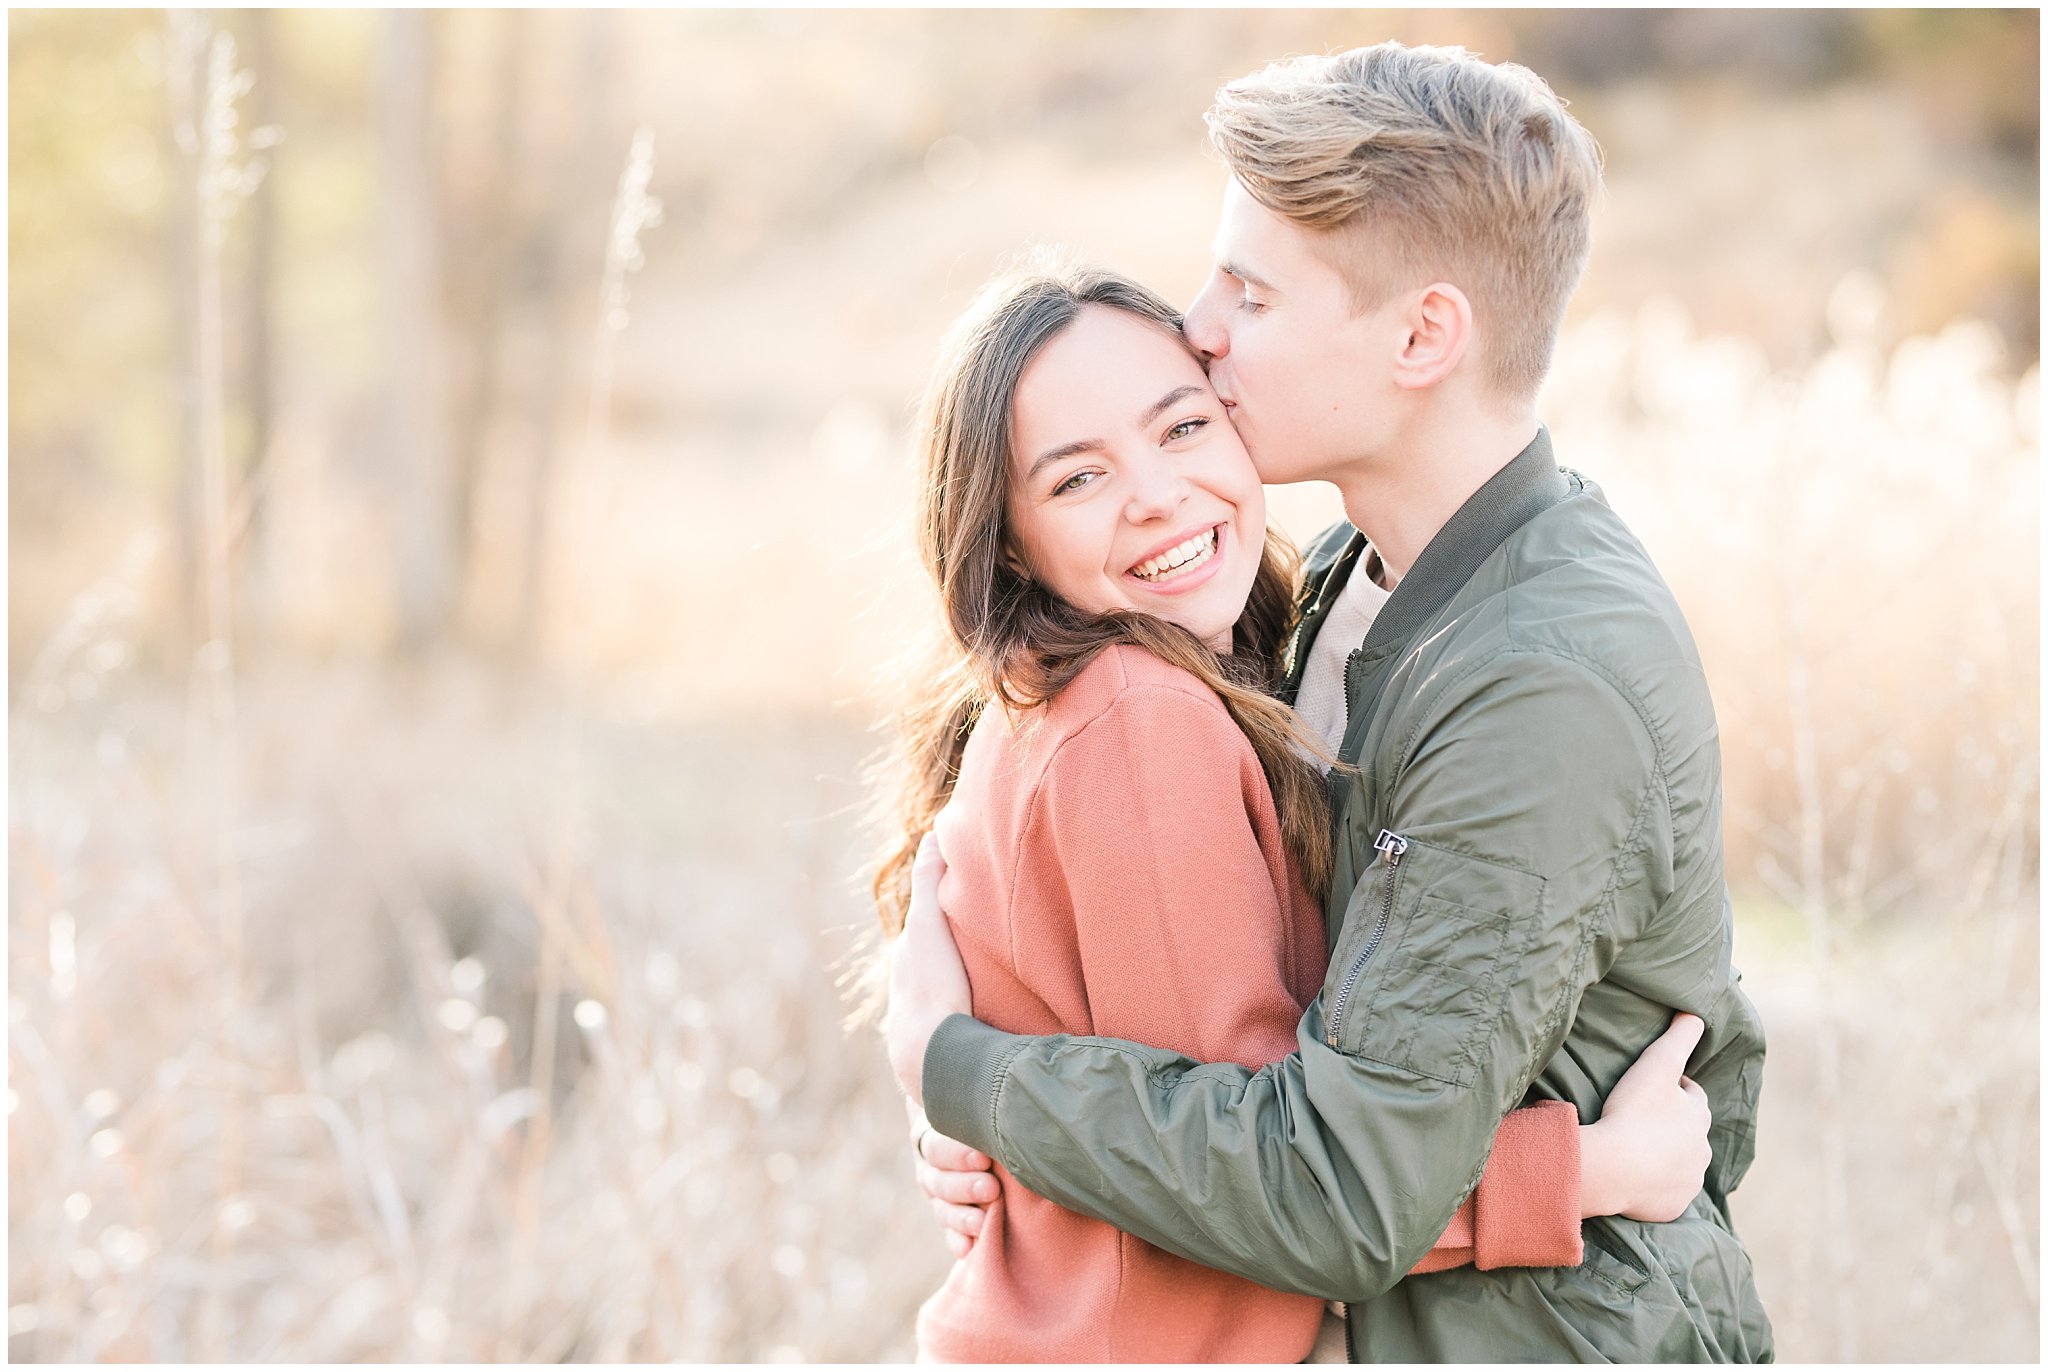 Couple dressed in fall colored sweater, jacket, jeans and boots in a meadow | Kays Creek Parkway Fall Engagement Session | Utah Fall Engagement | Jessie and Dallin Photography